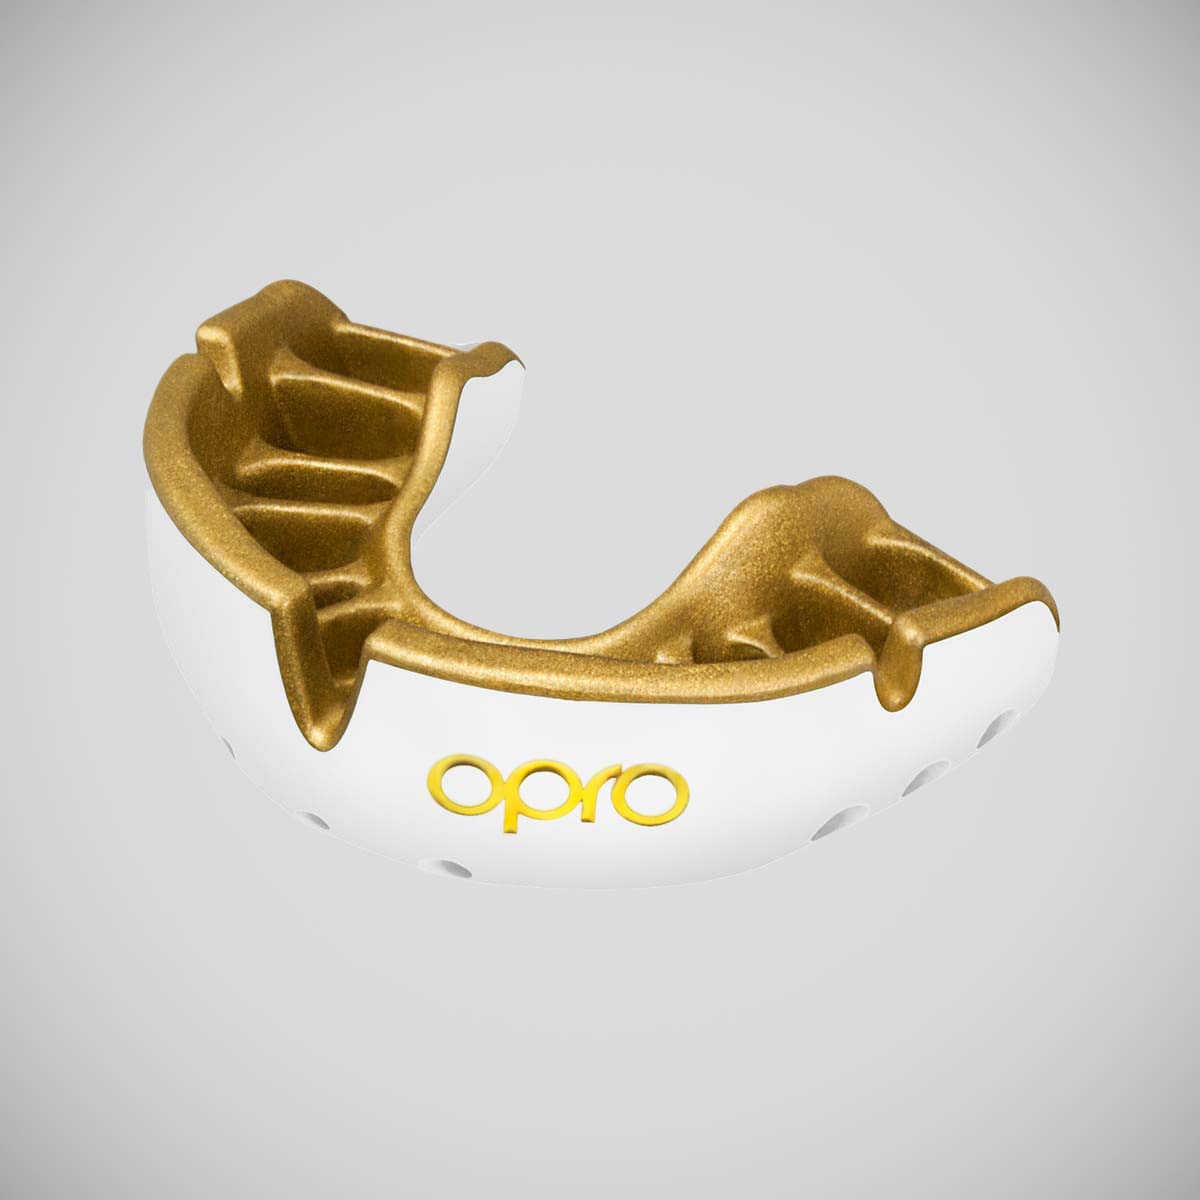 Opro Gold Self-Fit Mouth Guard White/Gold